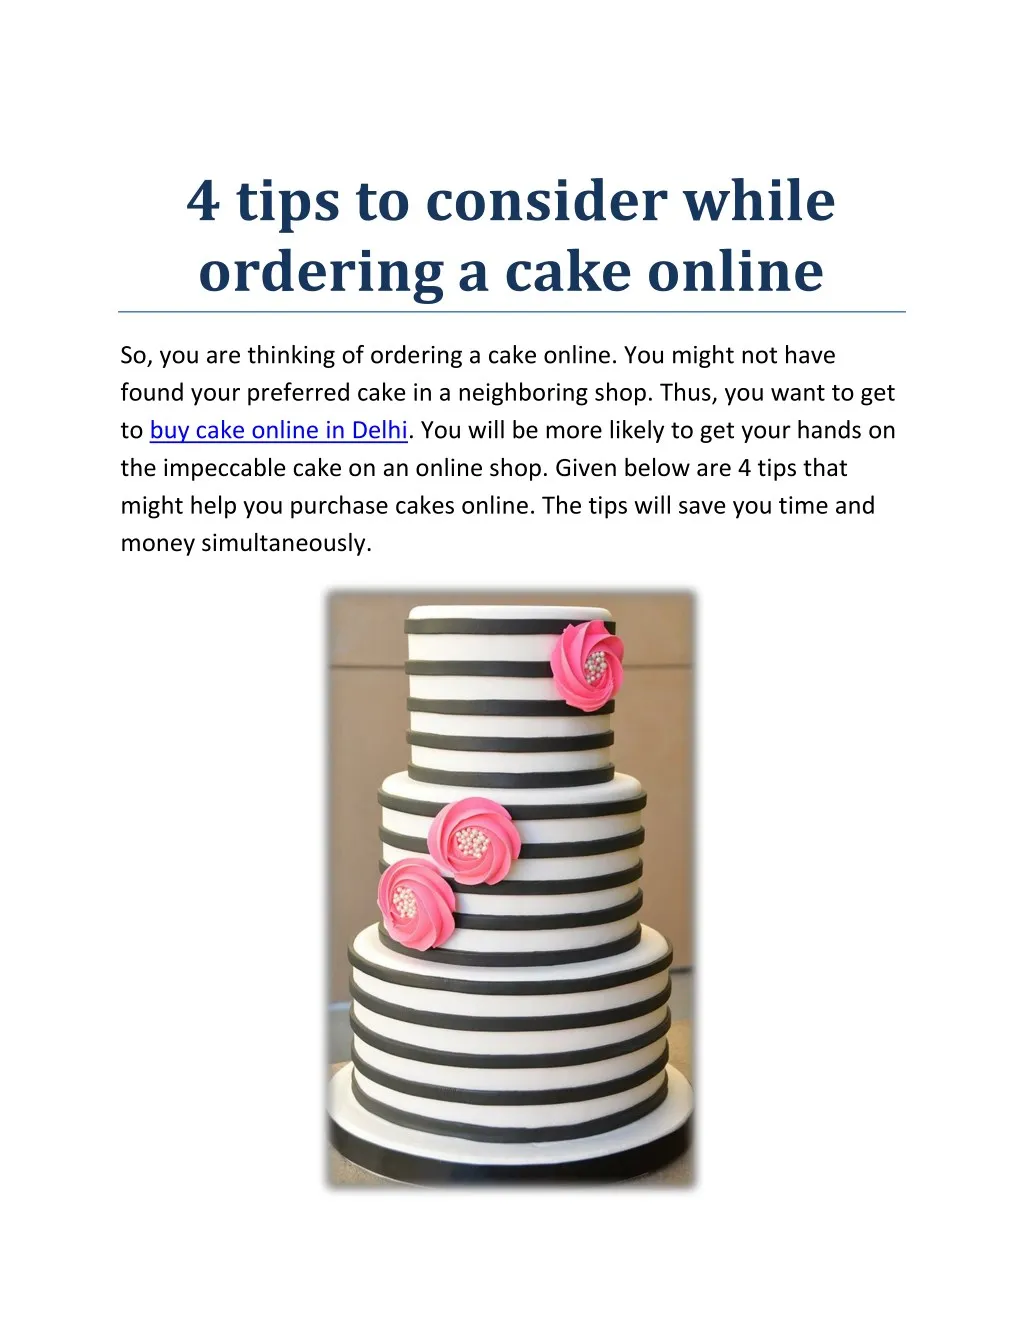 4 tips to consider while ordering a cake online